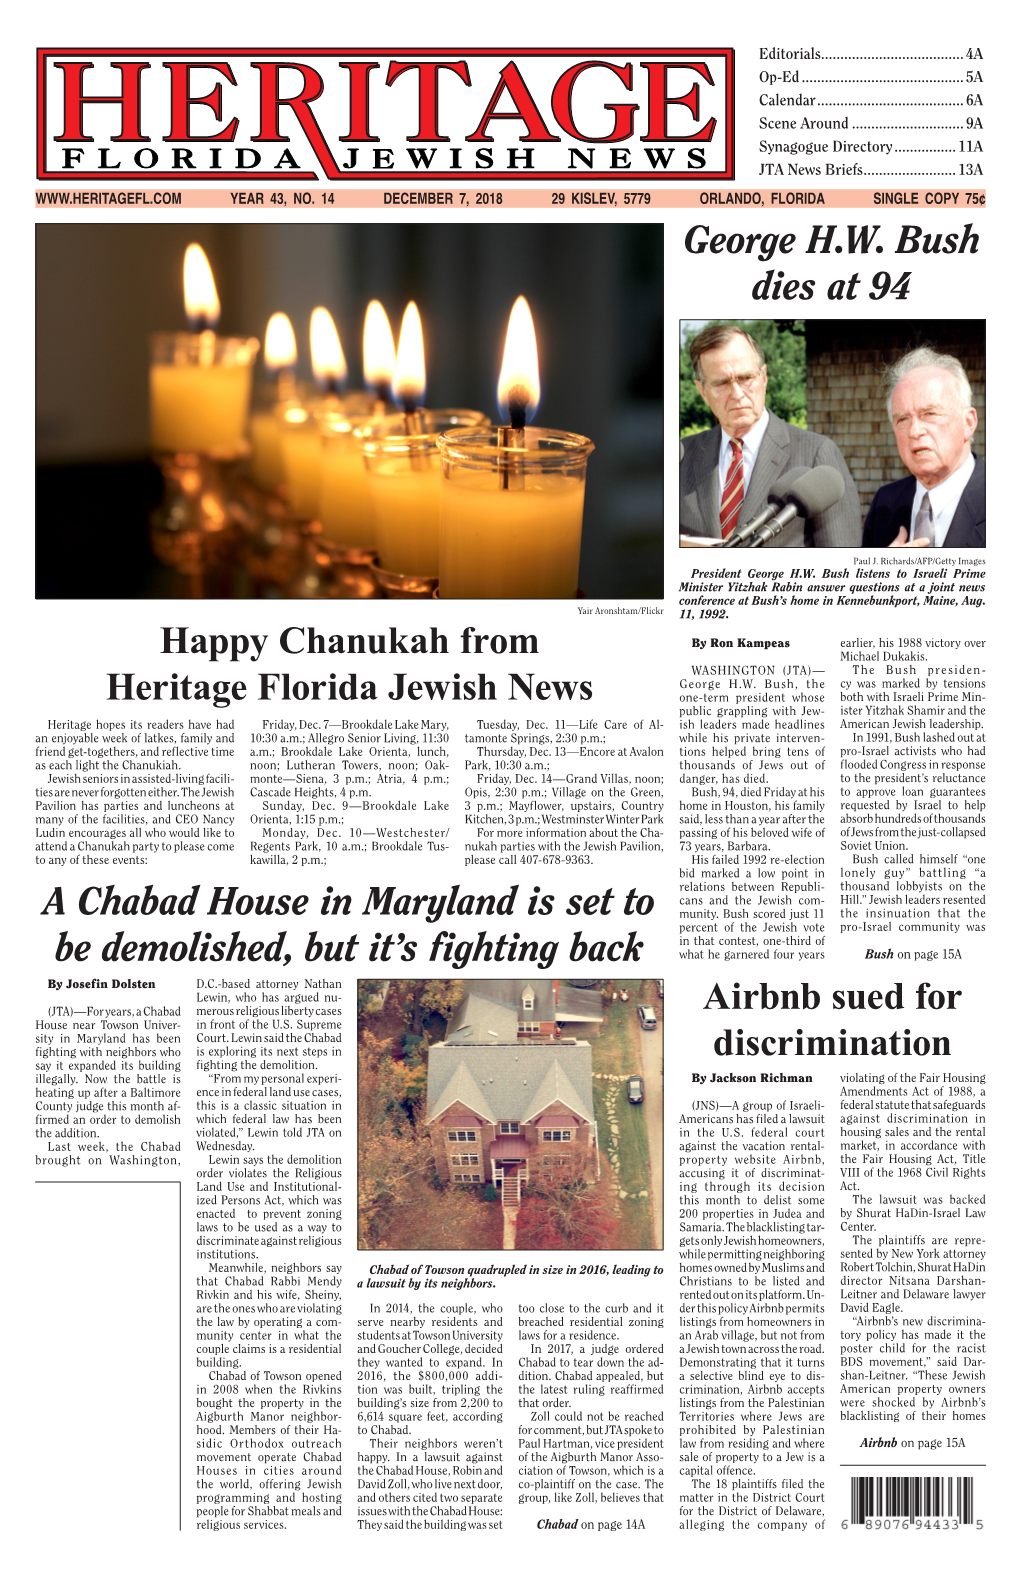 Happy Chanukah from Heritage Florida Jewish News a Chabad